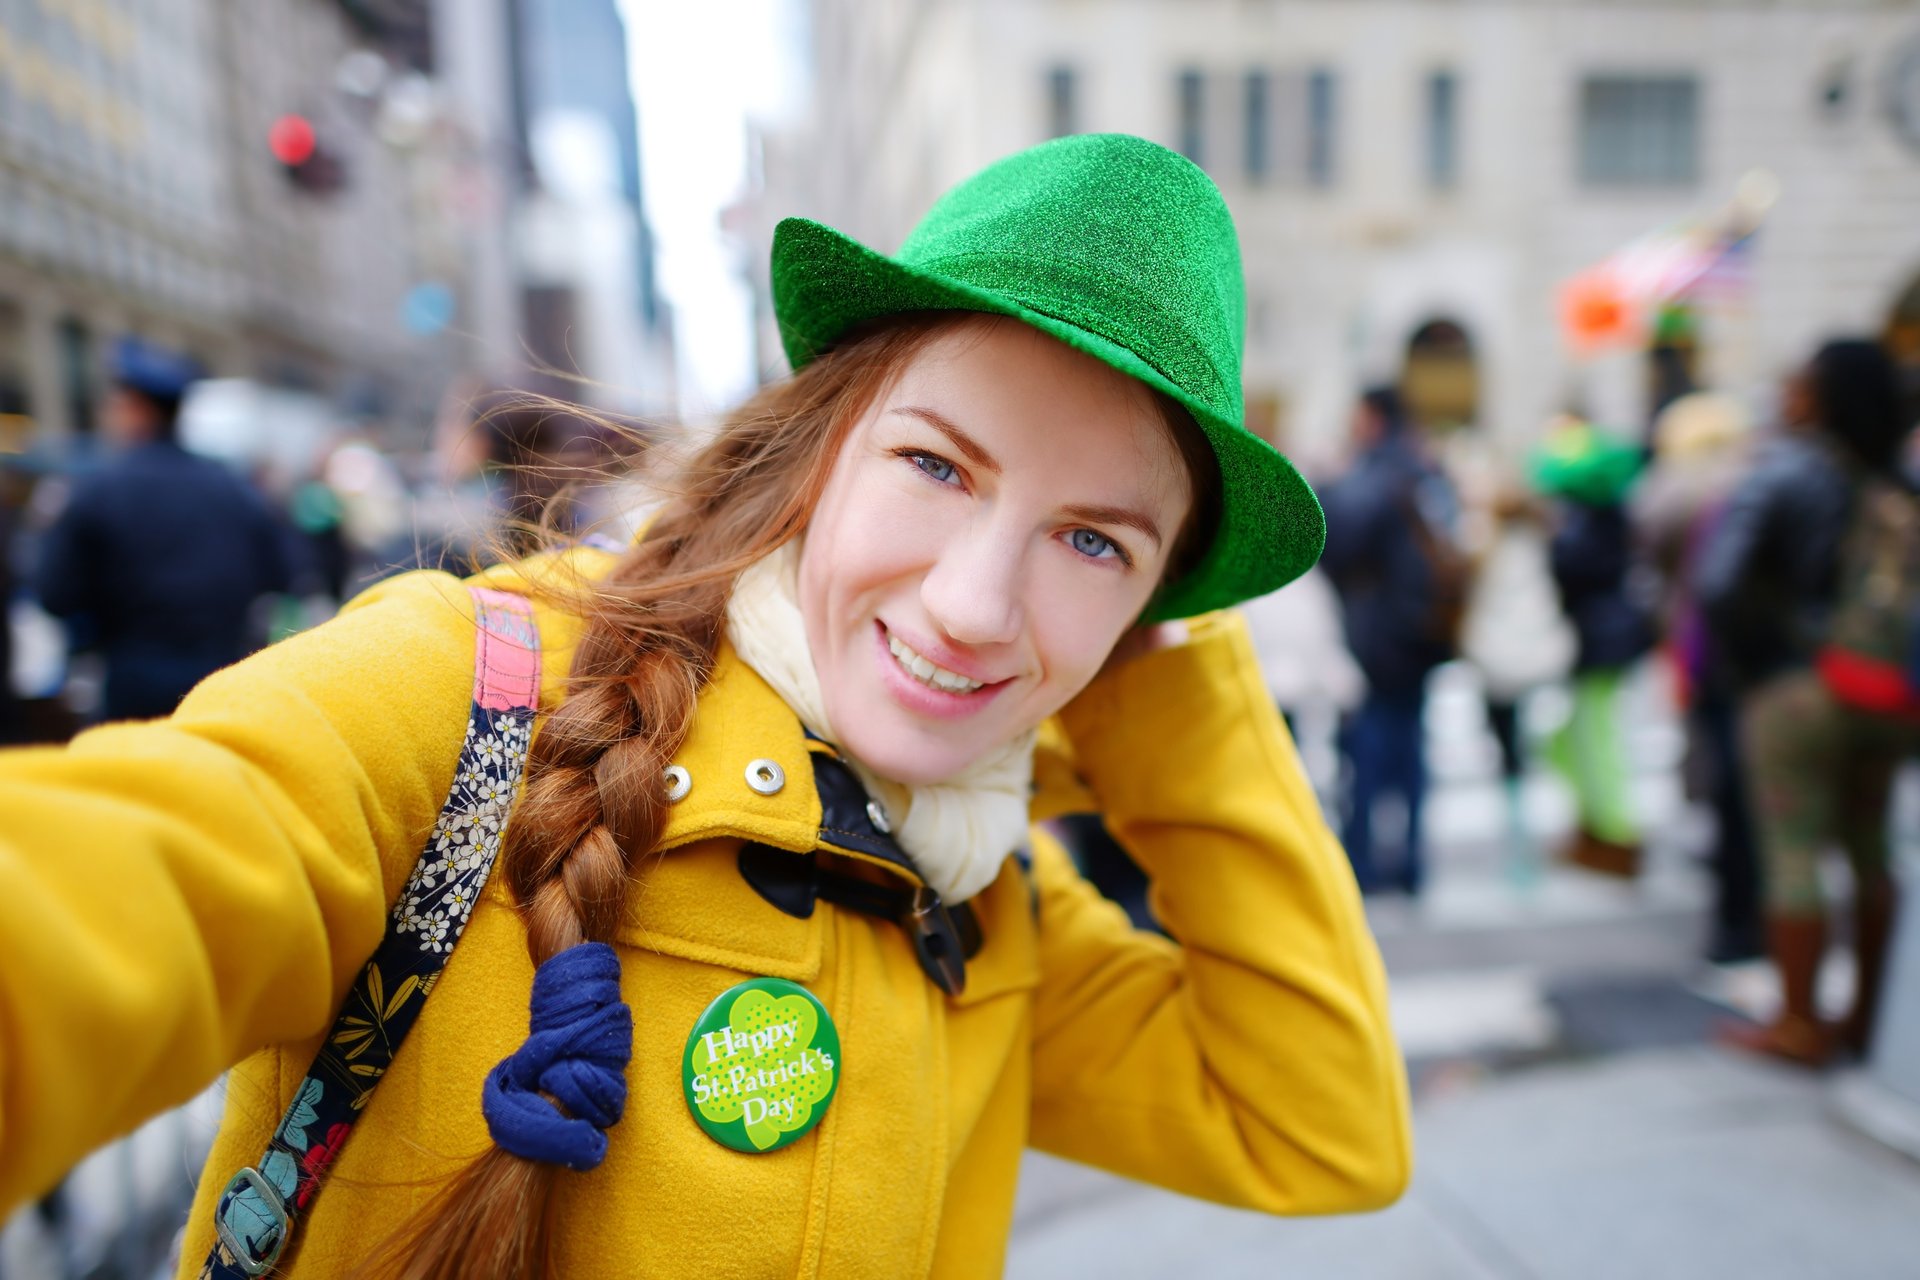 A young woman with a side braid and a bright smile is wearing a green leprechaun hat and a yellow coat,  taking a selfie.